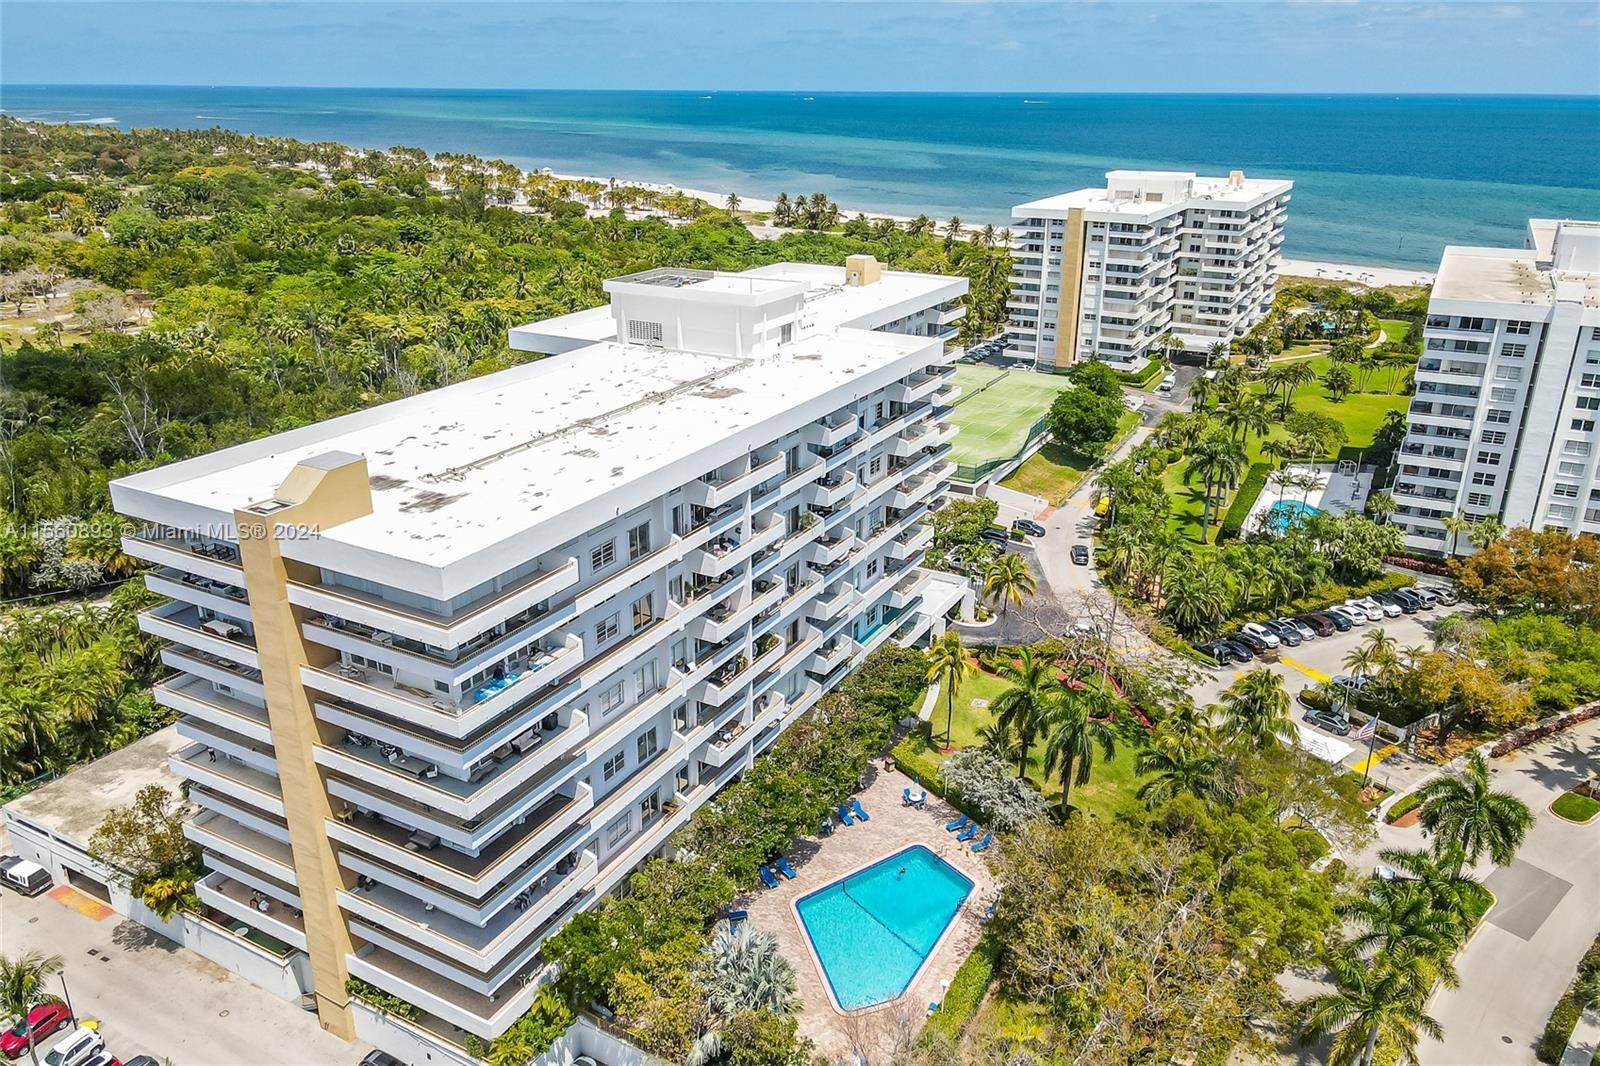 Gorgeous renovated fully furnished 2 bedroom and 2 bathroom unit by famous architect Ramon Alonso at the exclusive Commodore in Key Biscayne.